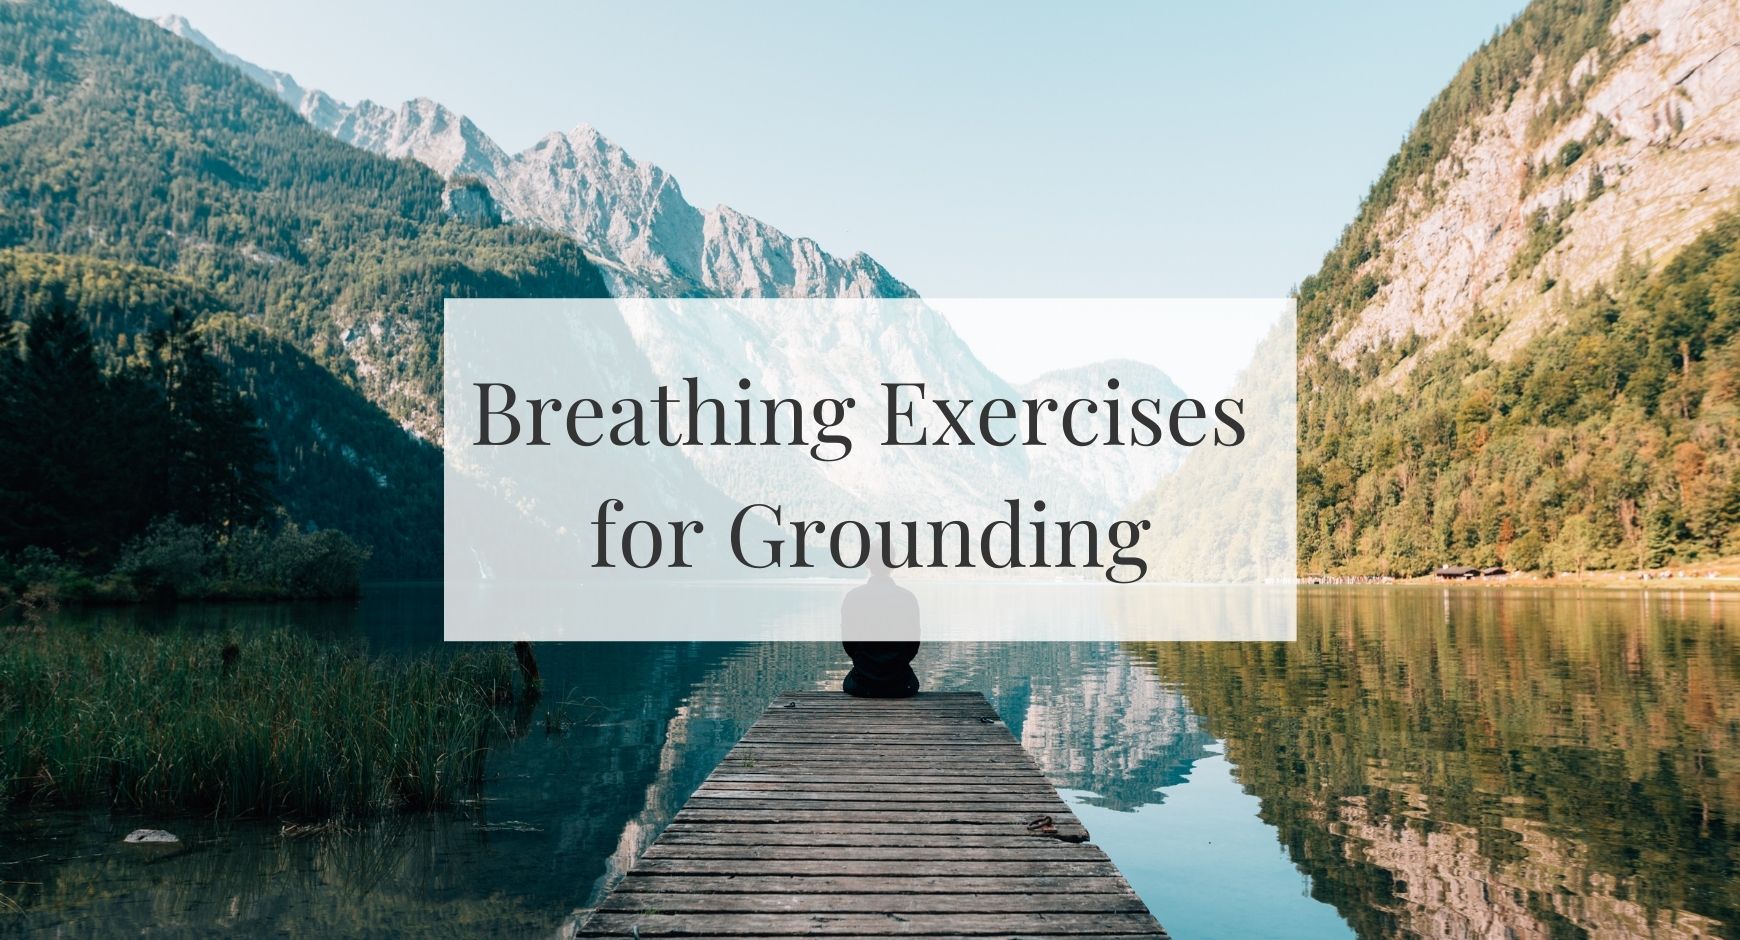 A man sitting on a pier on a lake between mountains under text that reads "Breathing Exercises for Grounding" 